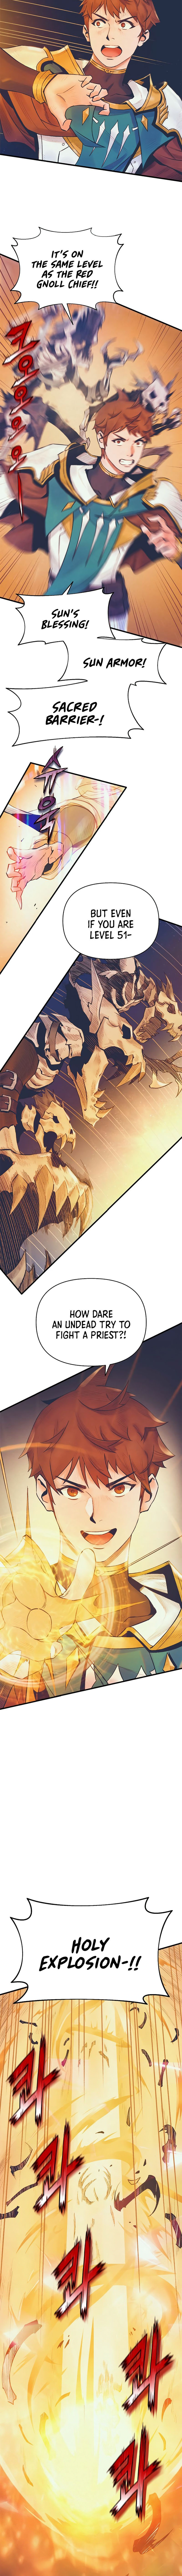 The Healing Priest of the Sun - Chapter 6 Page 5